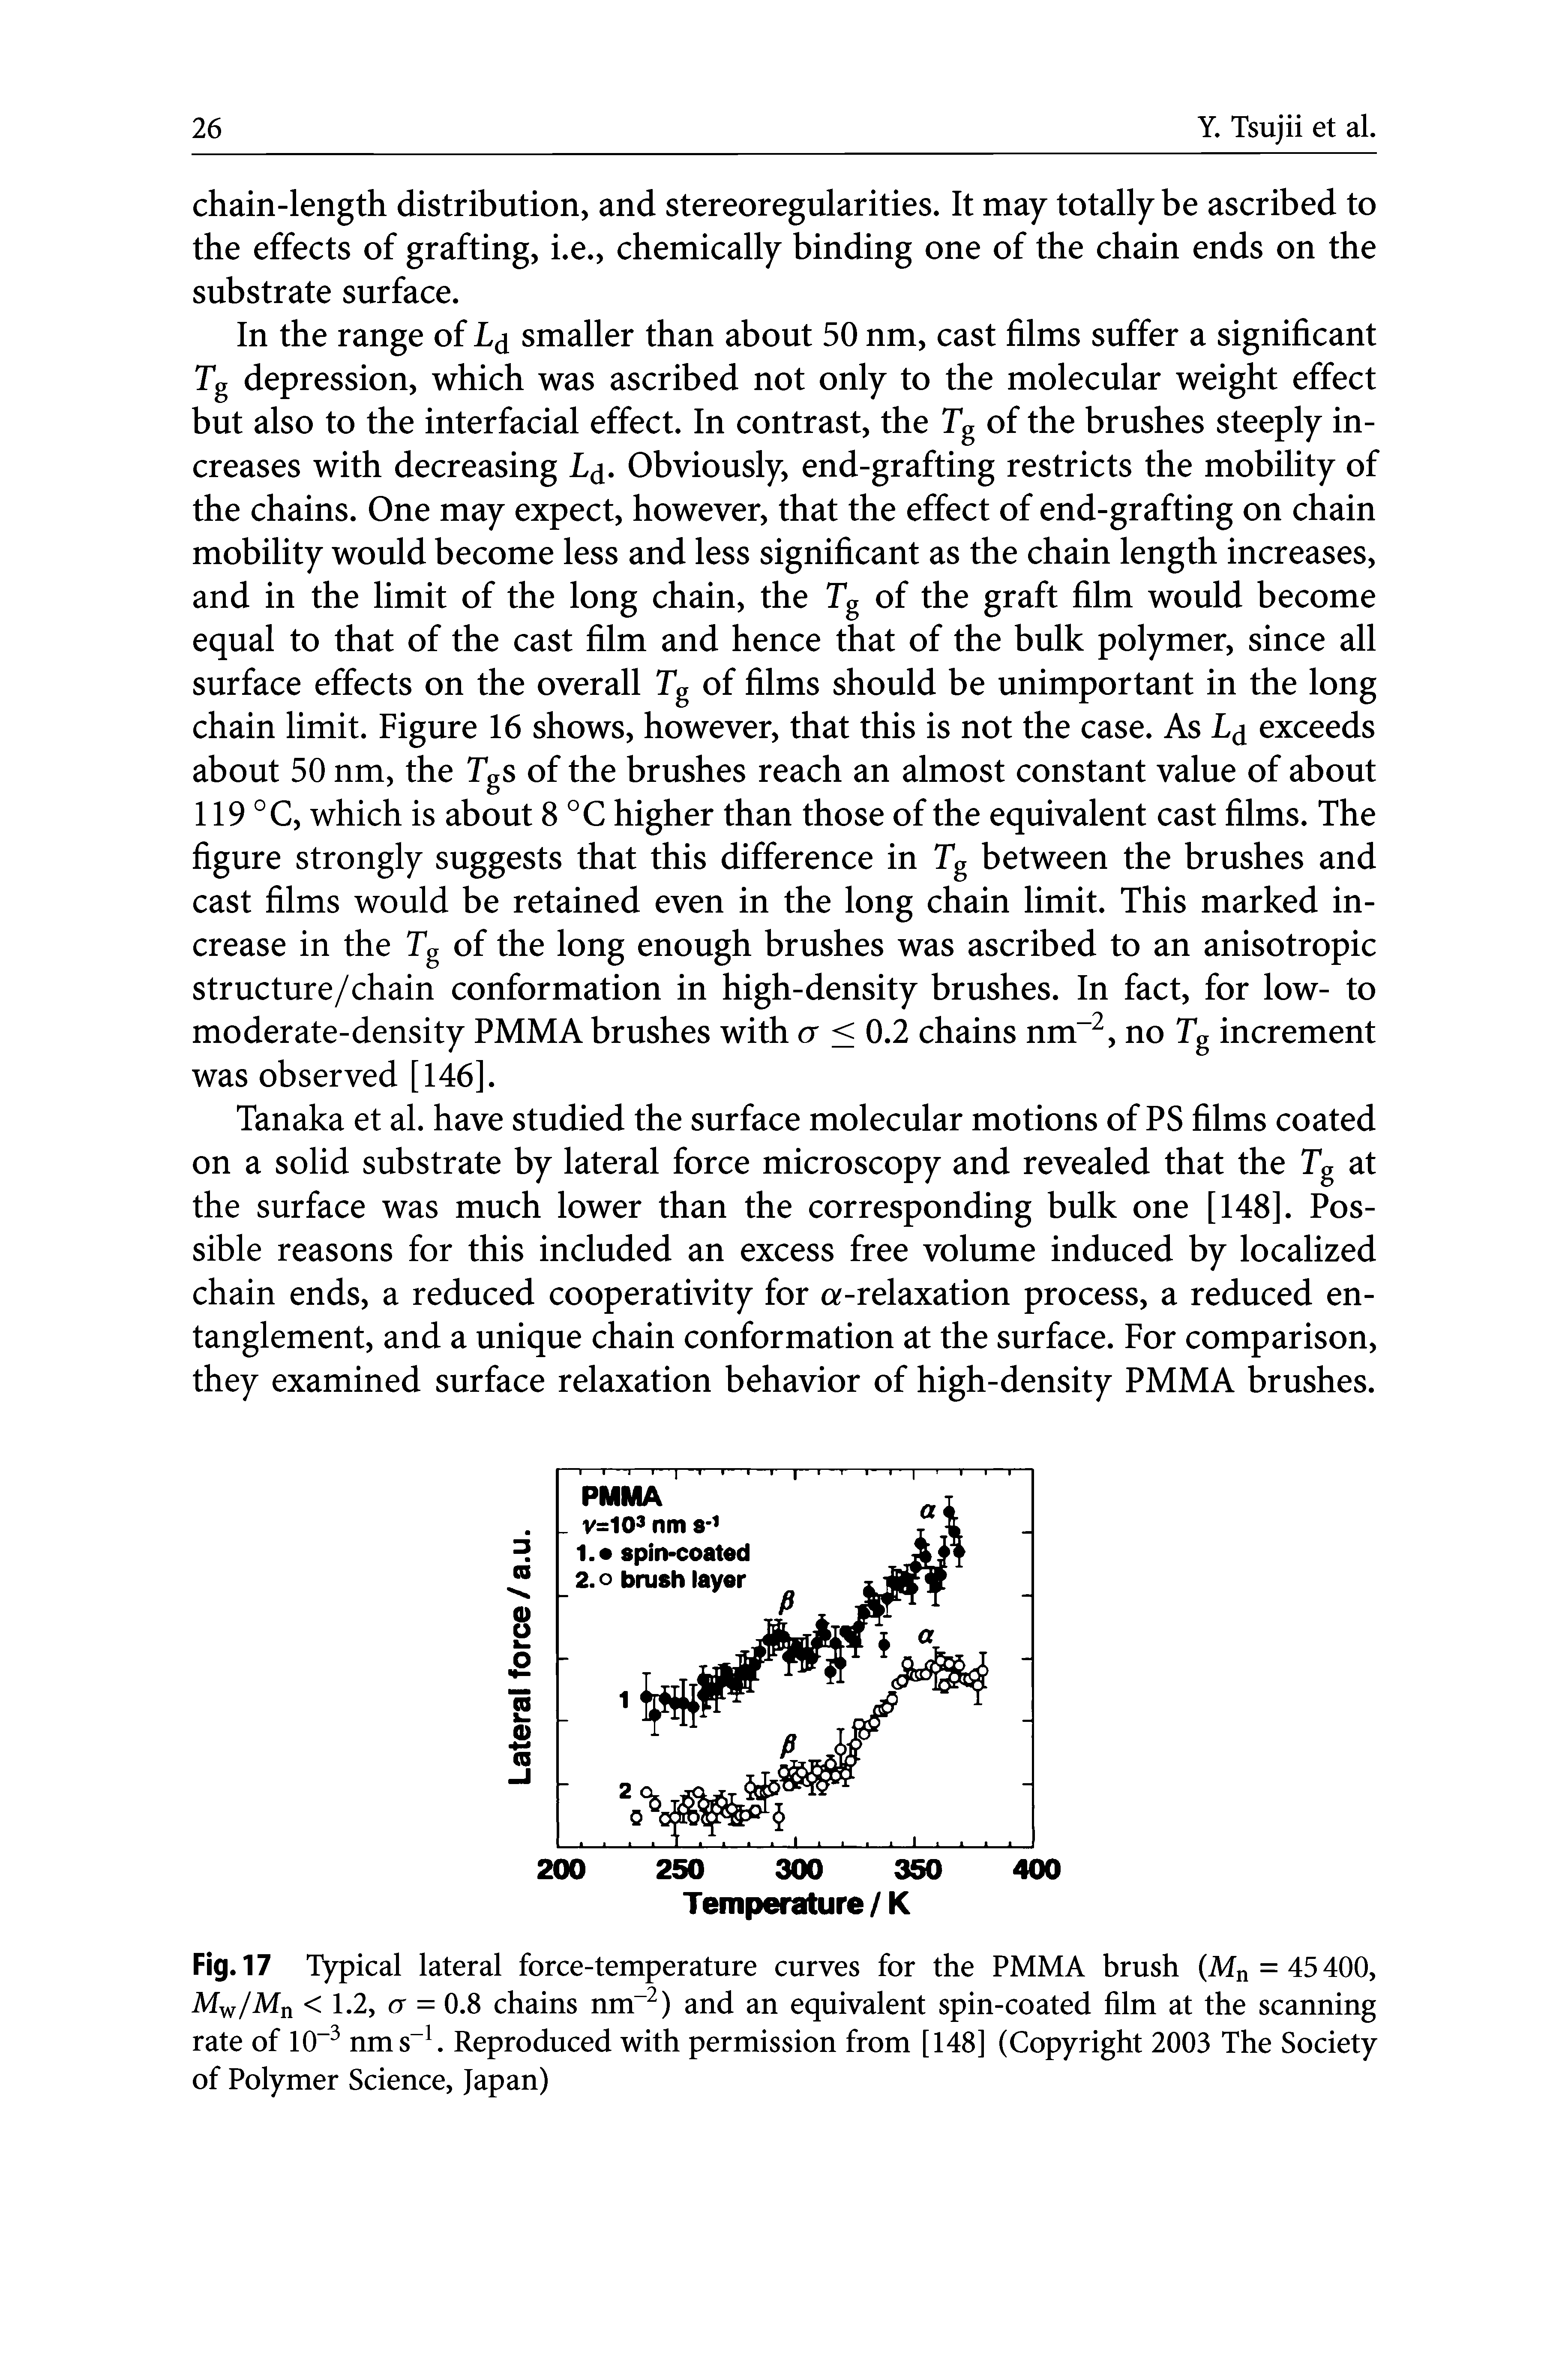 Fig. 17 Typical lateral force-temperature curves for the PMMA brush (Mn = 45400, Mw/Mn <1.2, a = 0.8 chains nm ) and an equivalent spin-coated film at the scanning rate of 10" nms . Reproduced with permission from [148] (Copyright 2003 The Society of Polymer Science, Japan)...